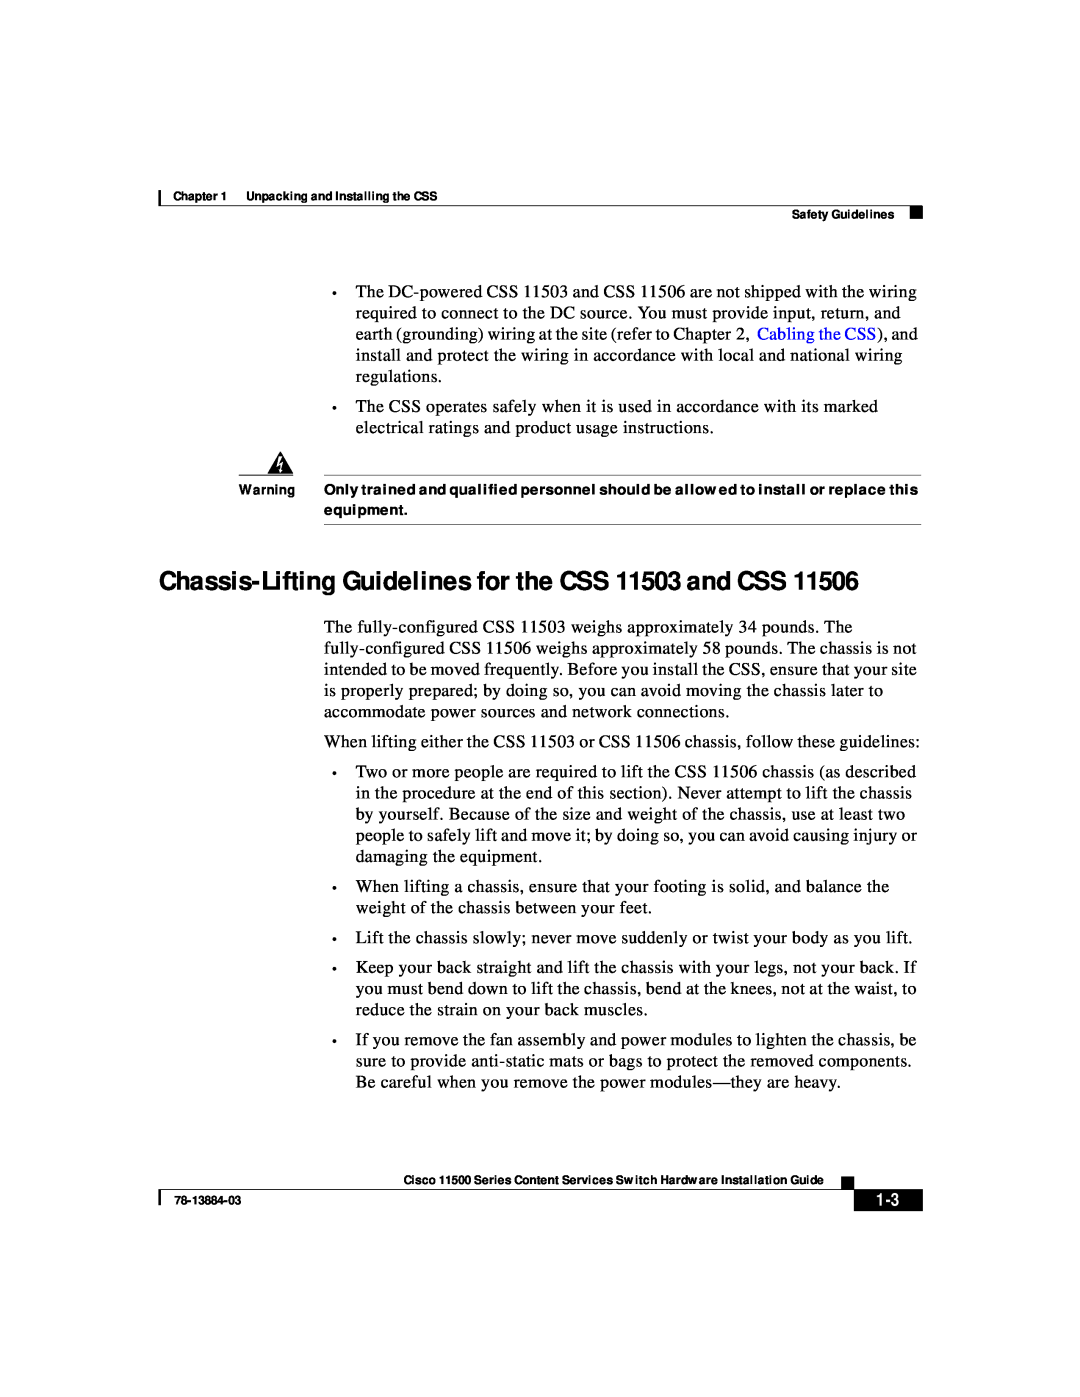 Cisco Systems 11500 Series manual Chassis-Lifting Guidelines for the CSS 11503 and CSS 